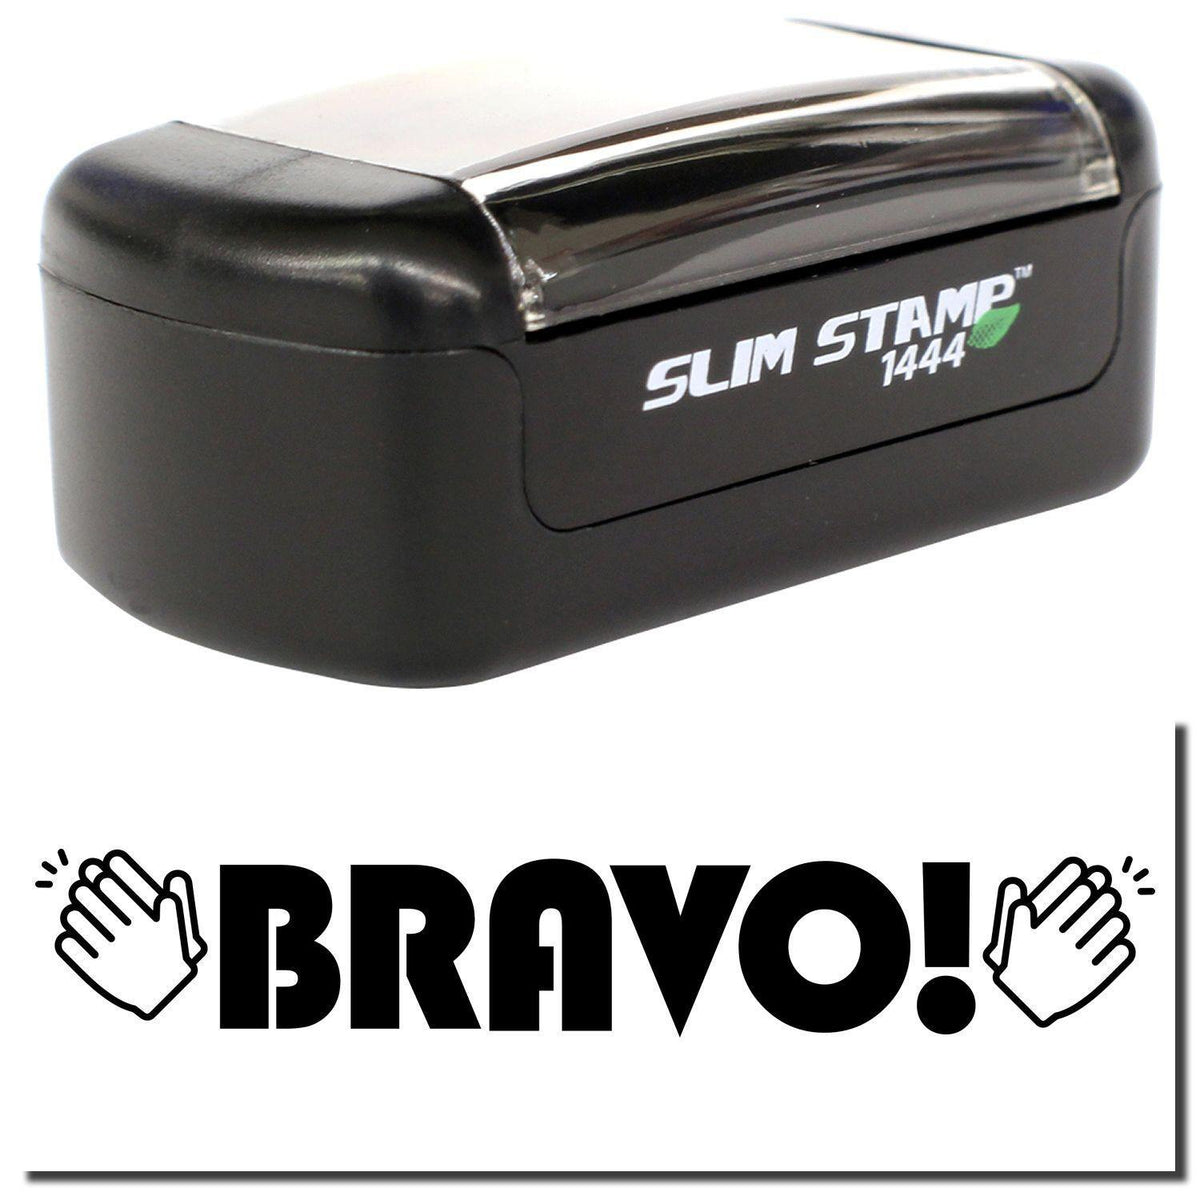 A stock office pre-inked stamp with a stamped image showing how the text &quot;BRAVO!&quot; with clapping hands on both sides of the text is displayed after stamping.